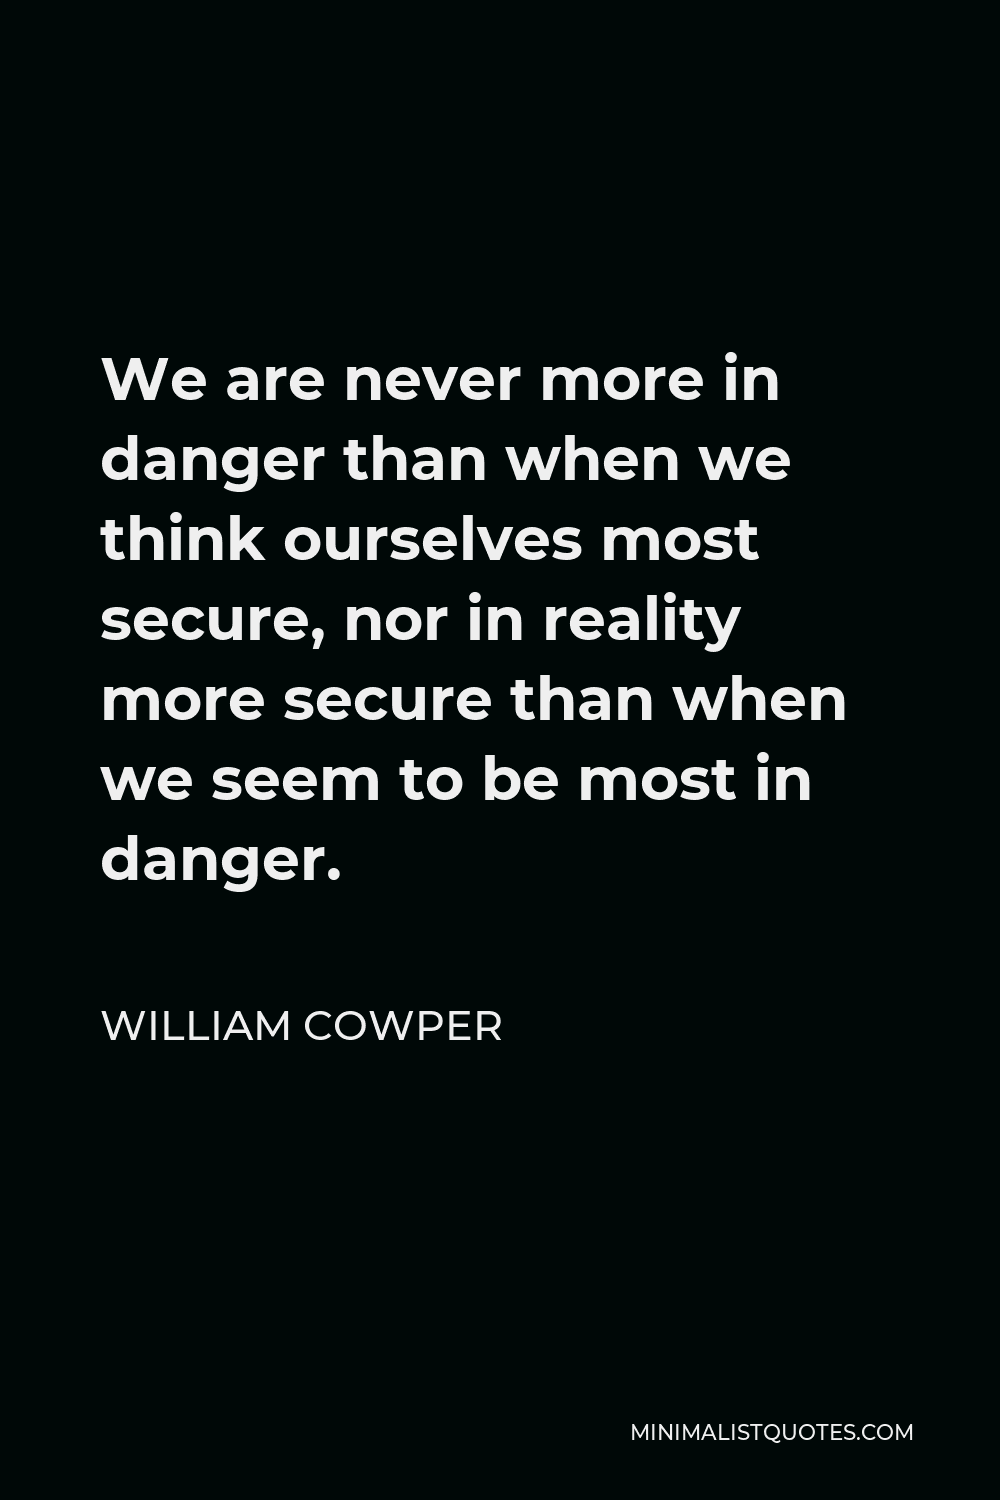 William Cowper Quote - We are never more in danger than when we think ourselves most secure, nor in reality more secure than when we seem to be most in danger.